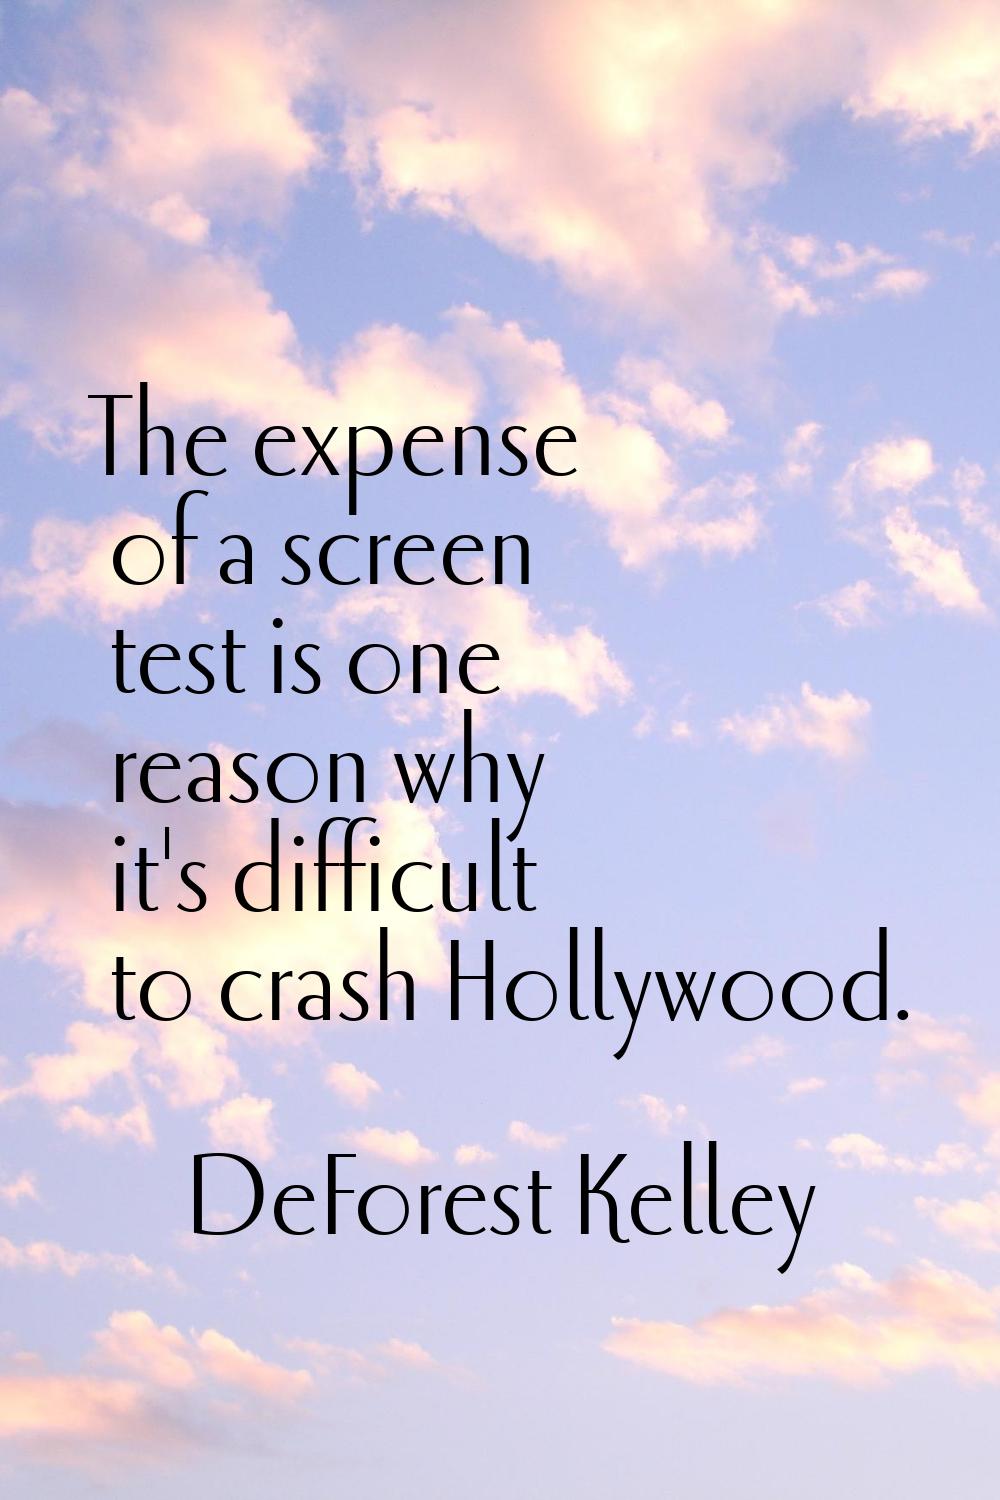 The expense of a screen test is one reason why it's difficult to crash Hollywood.